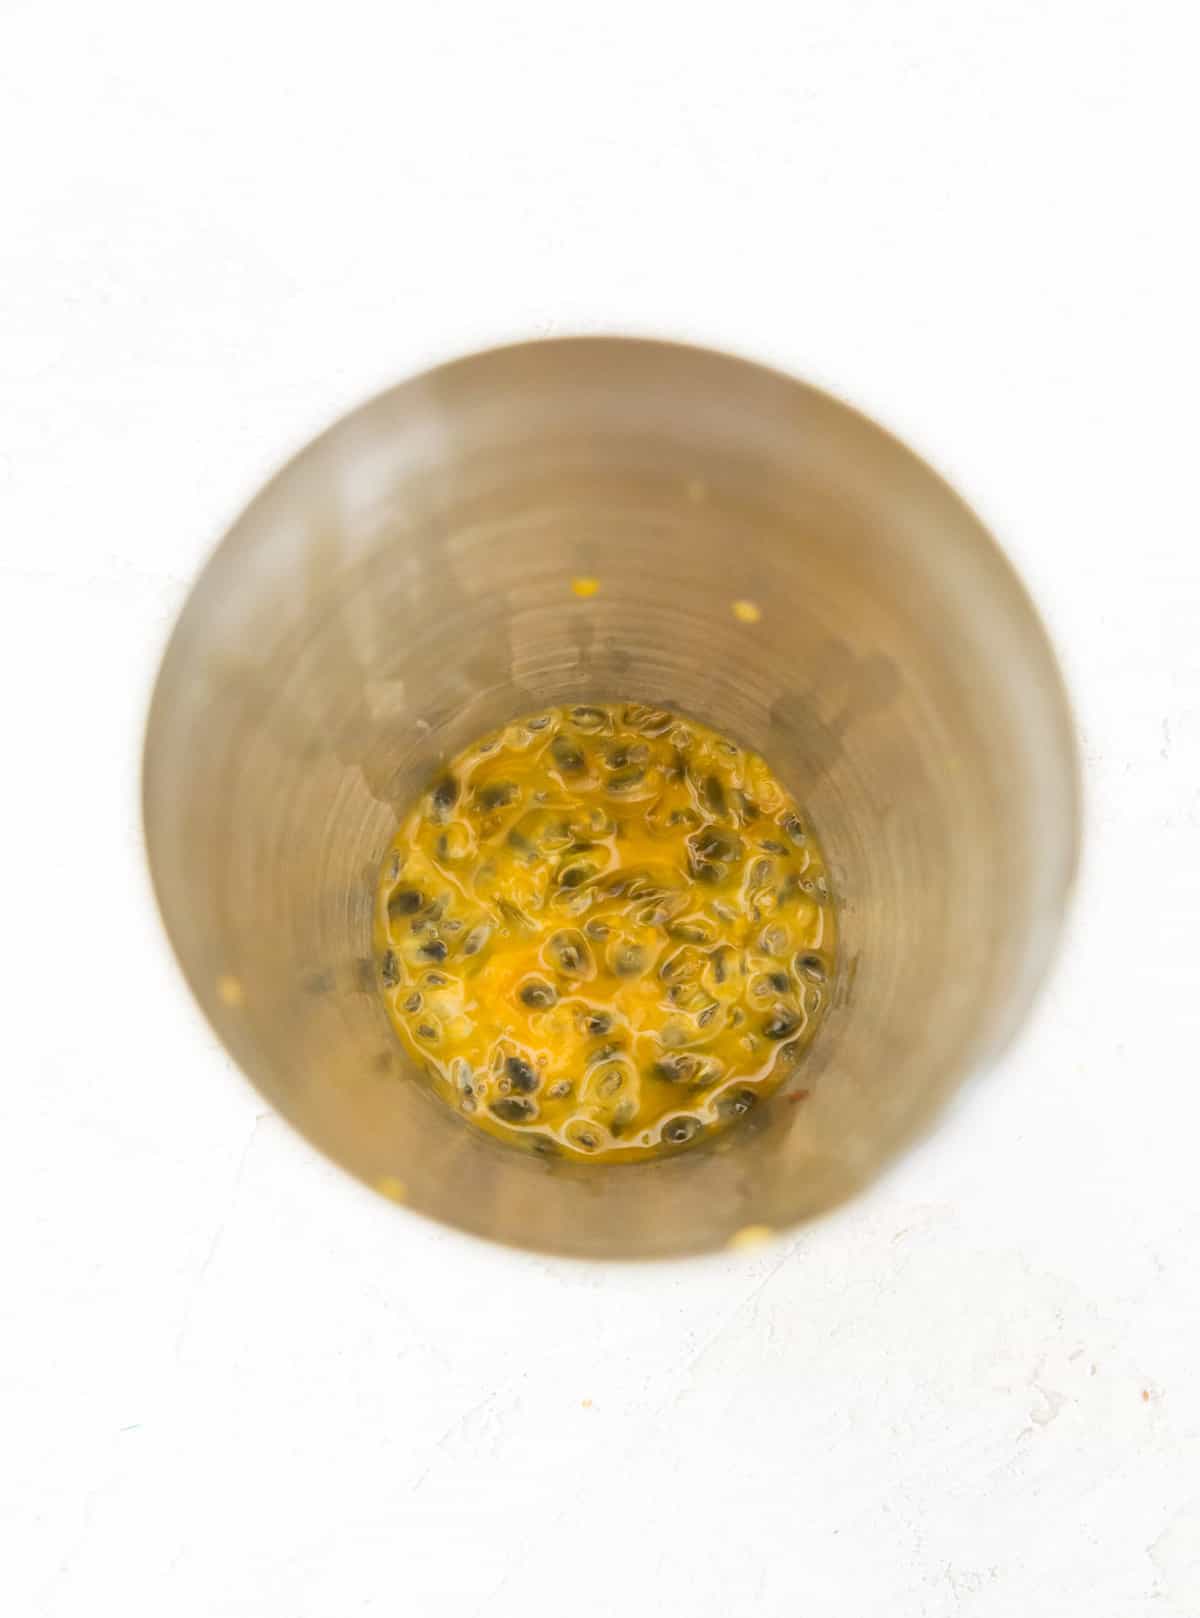 Passion fruit puree and seeds in a cocktail shaker.